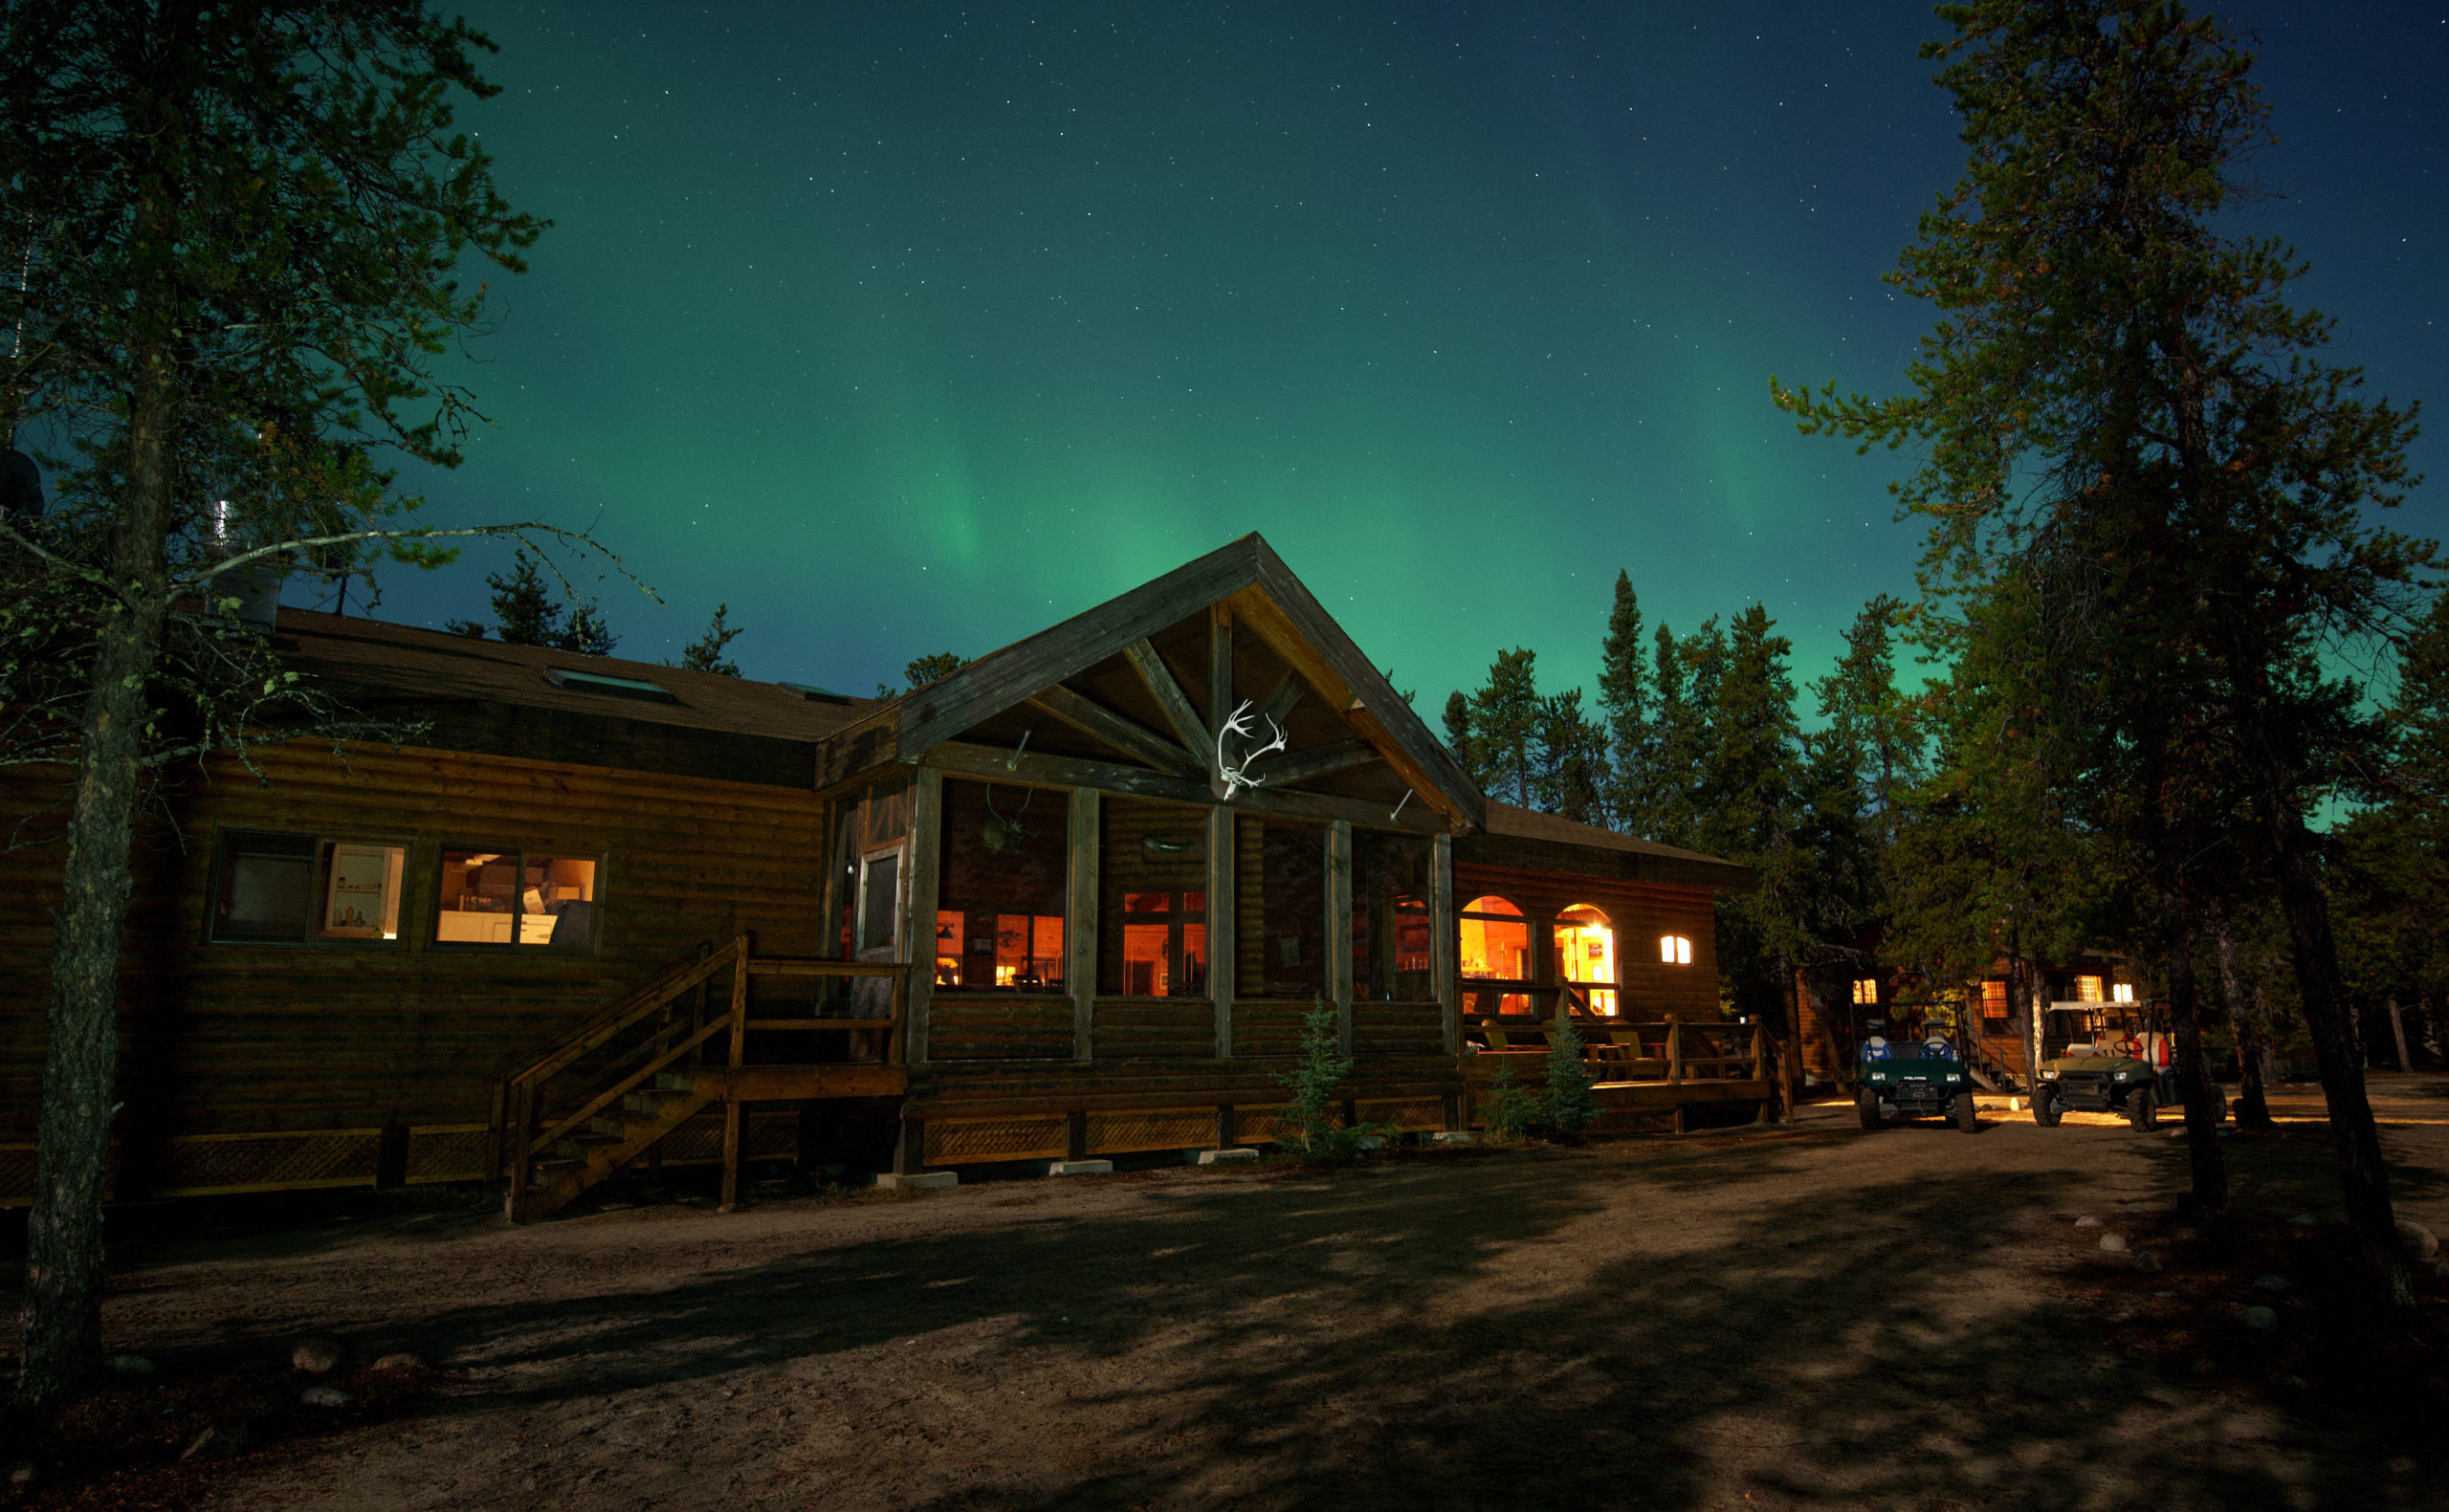 landscape image of the main lodge at night with green northern lights in the sky